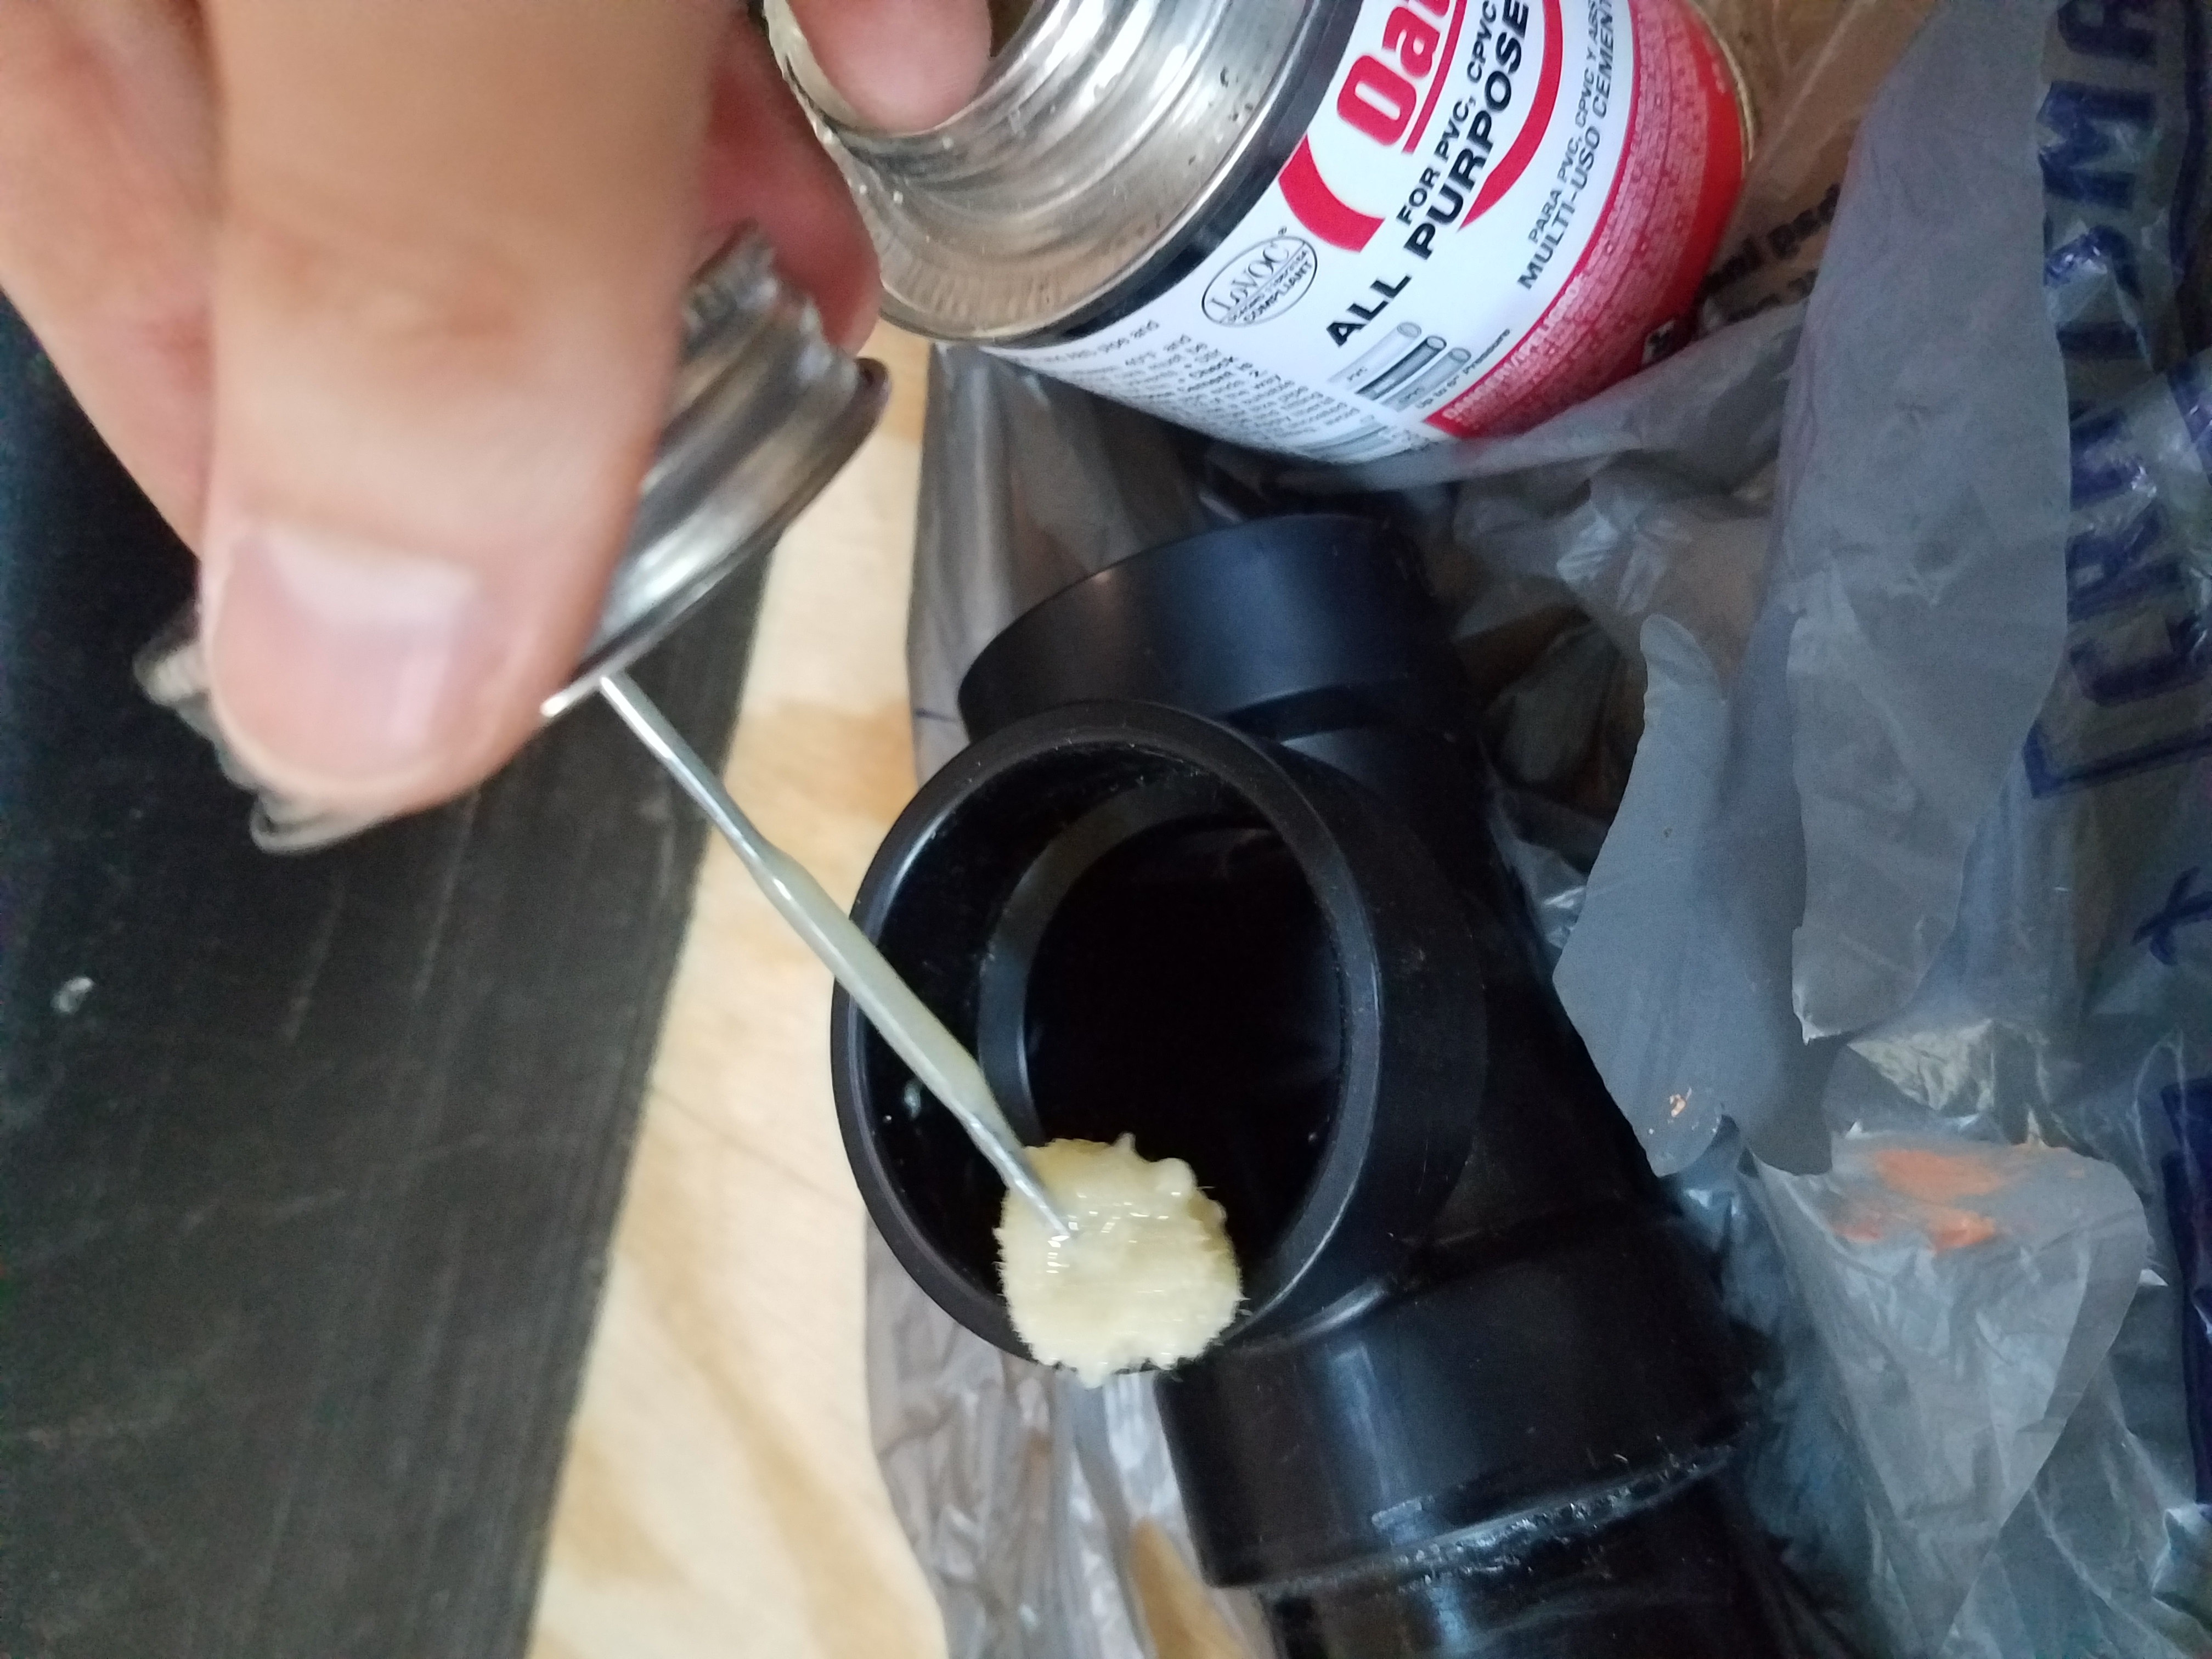 Using ABS pipe glue to connect the pipes